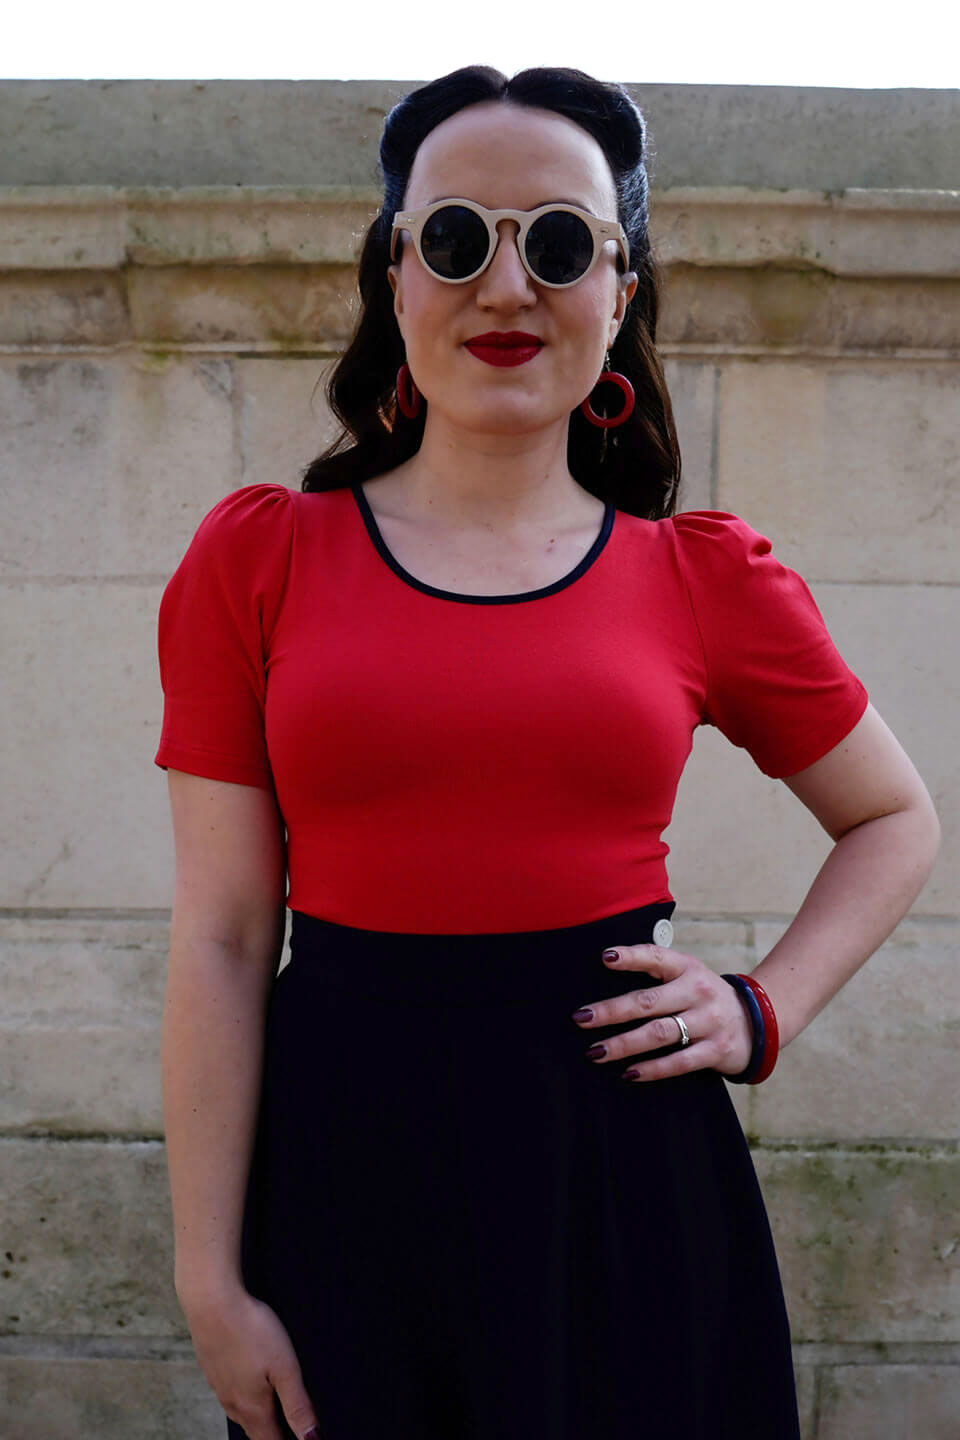 1930s Style Round Red Sunglasses 